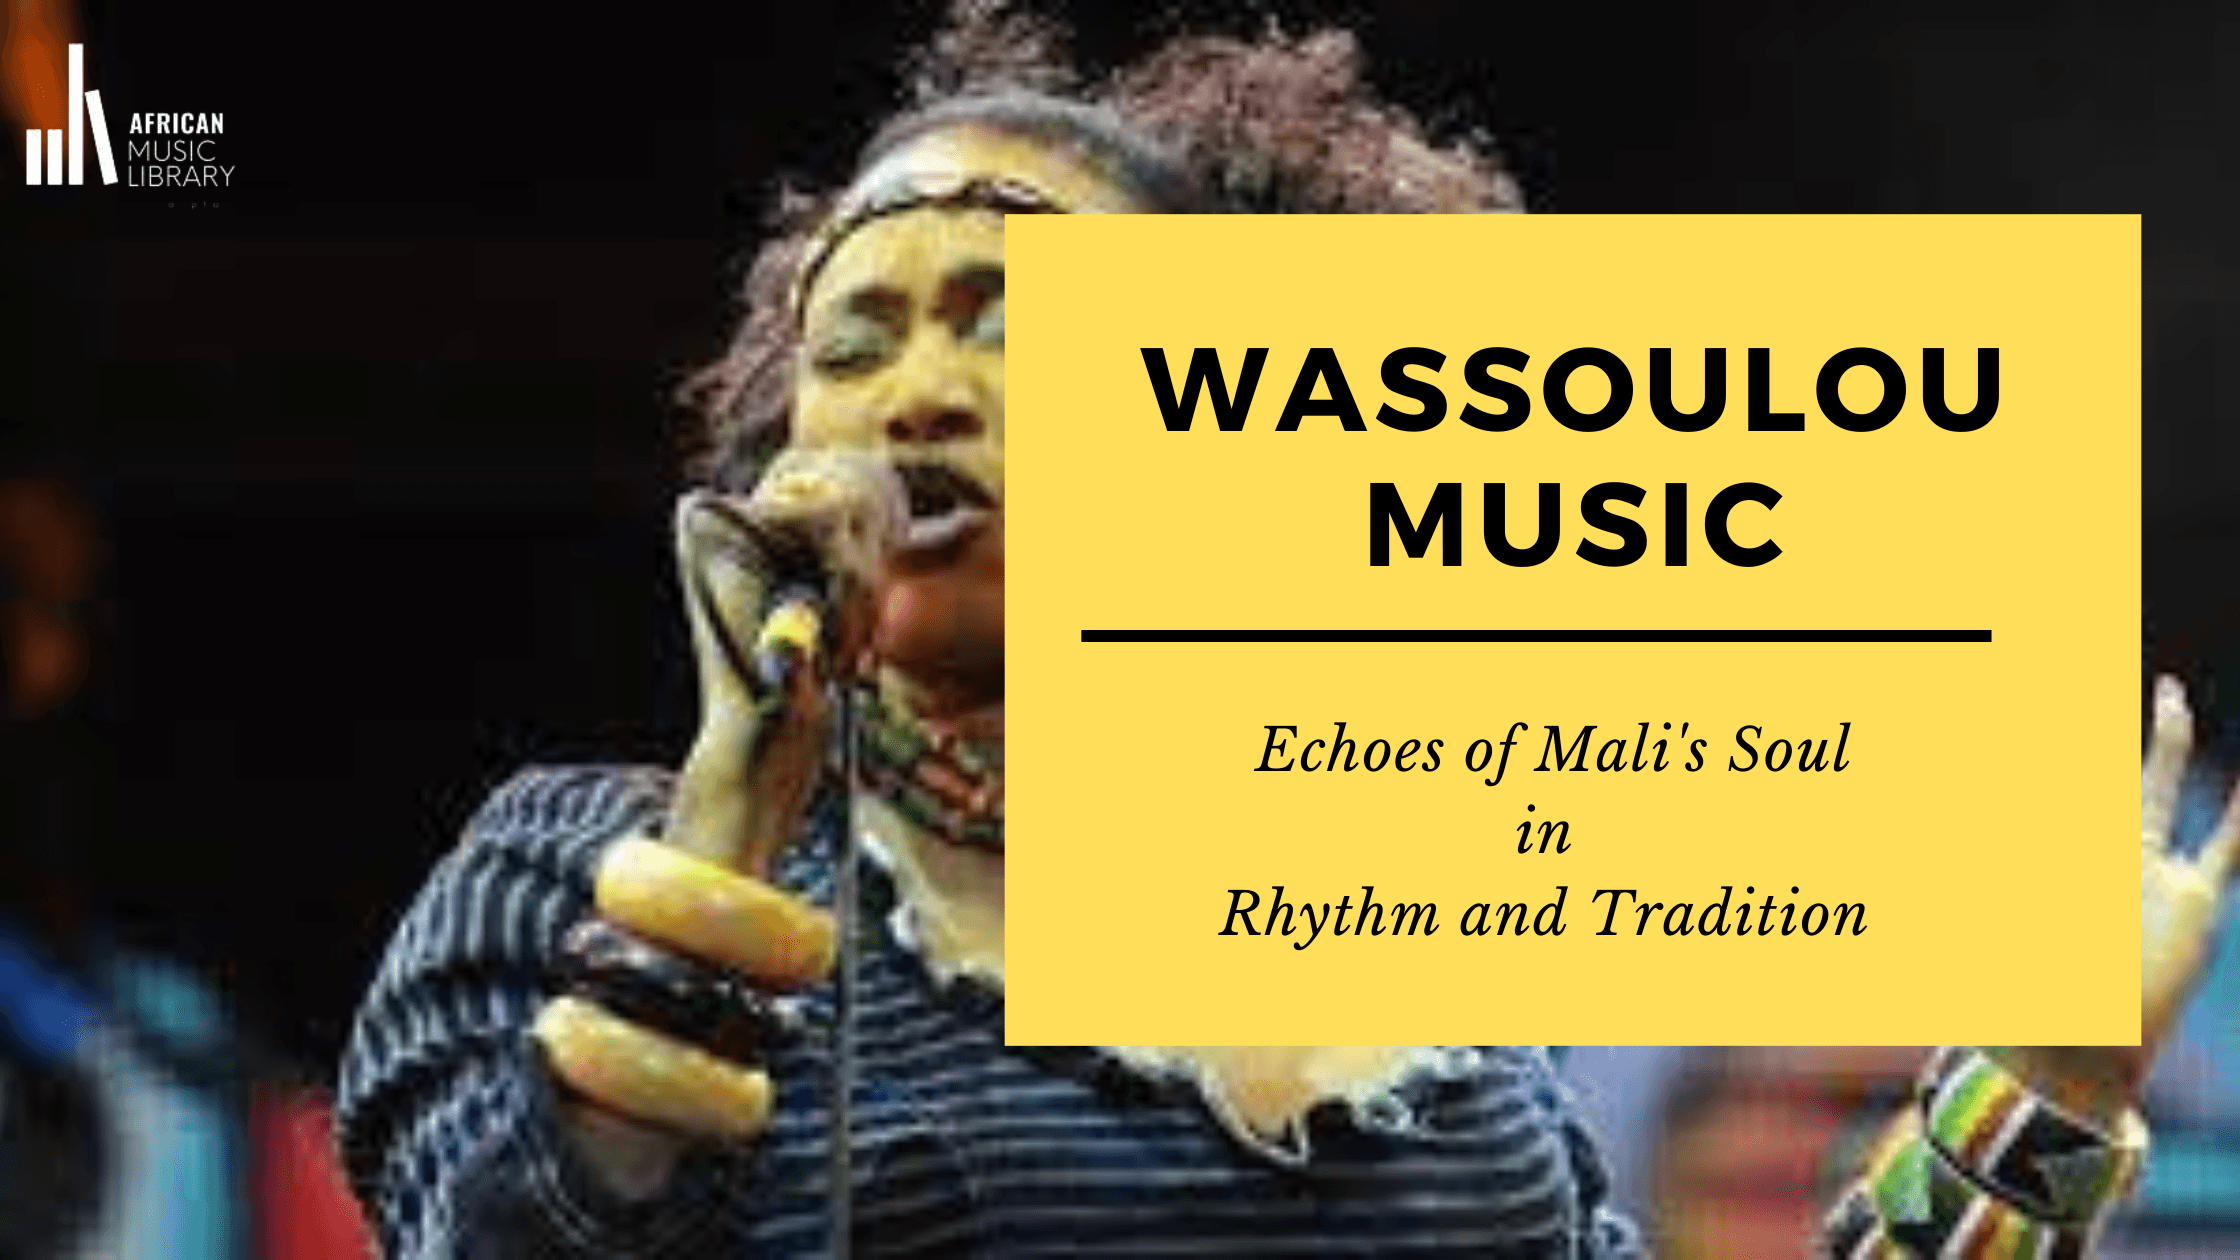 Wassoulou Music: Echoes of Mali Soul in Rhythm and Tradition